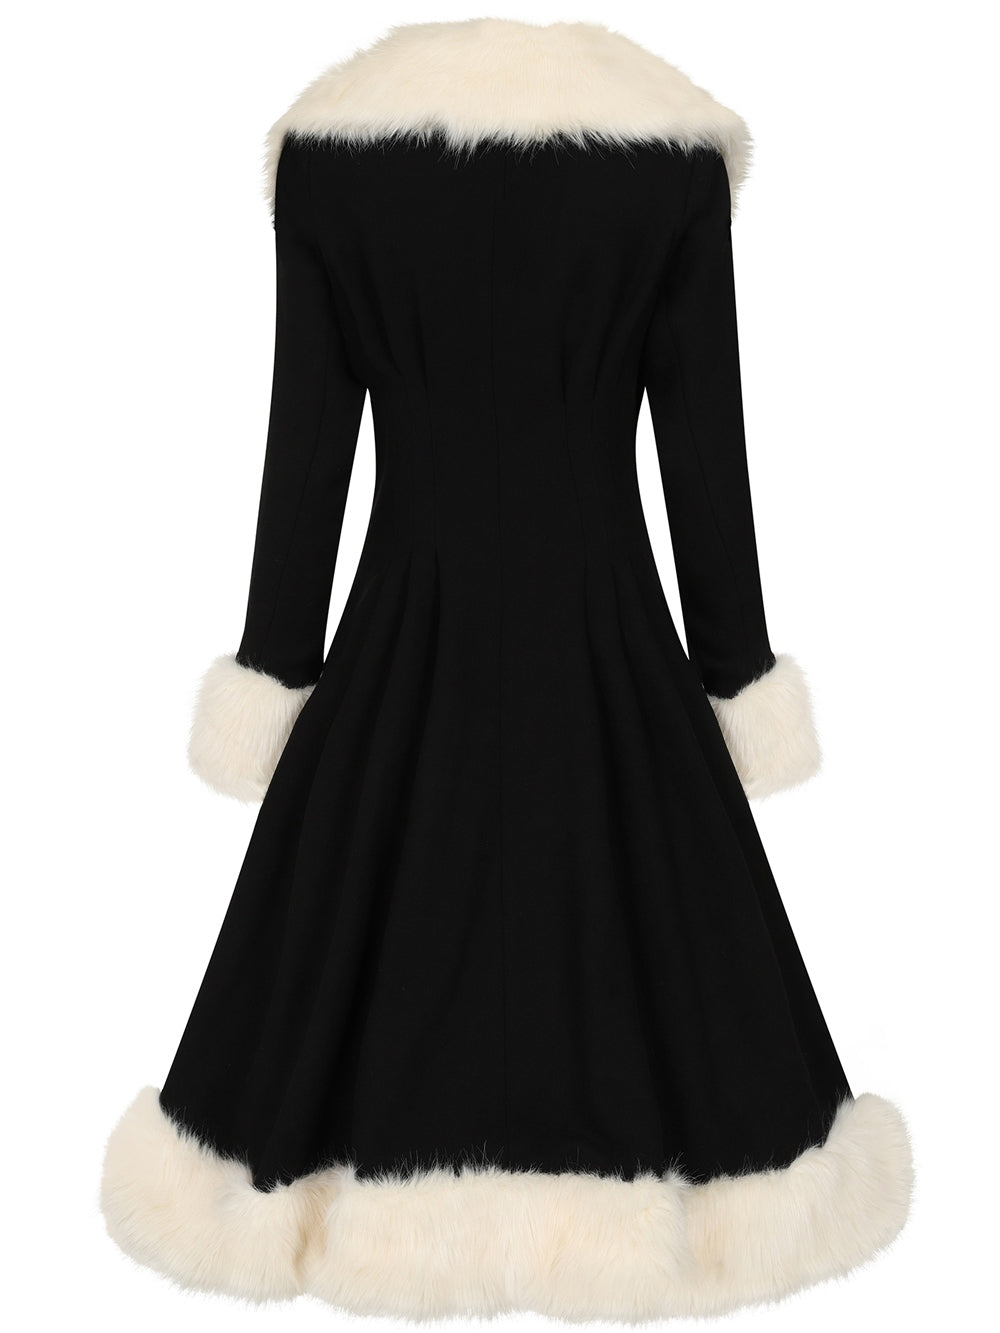 Pearl Coat in Black by Collectif